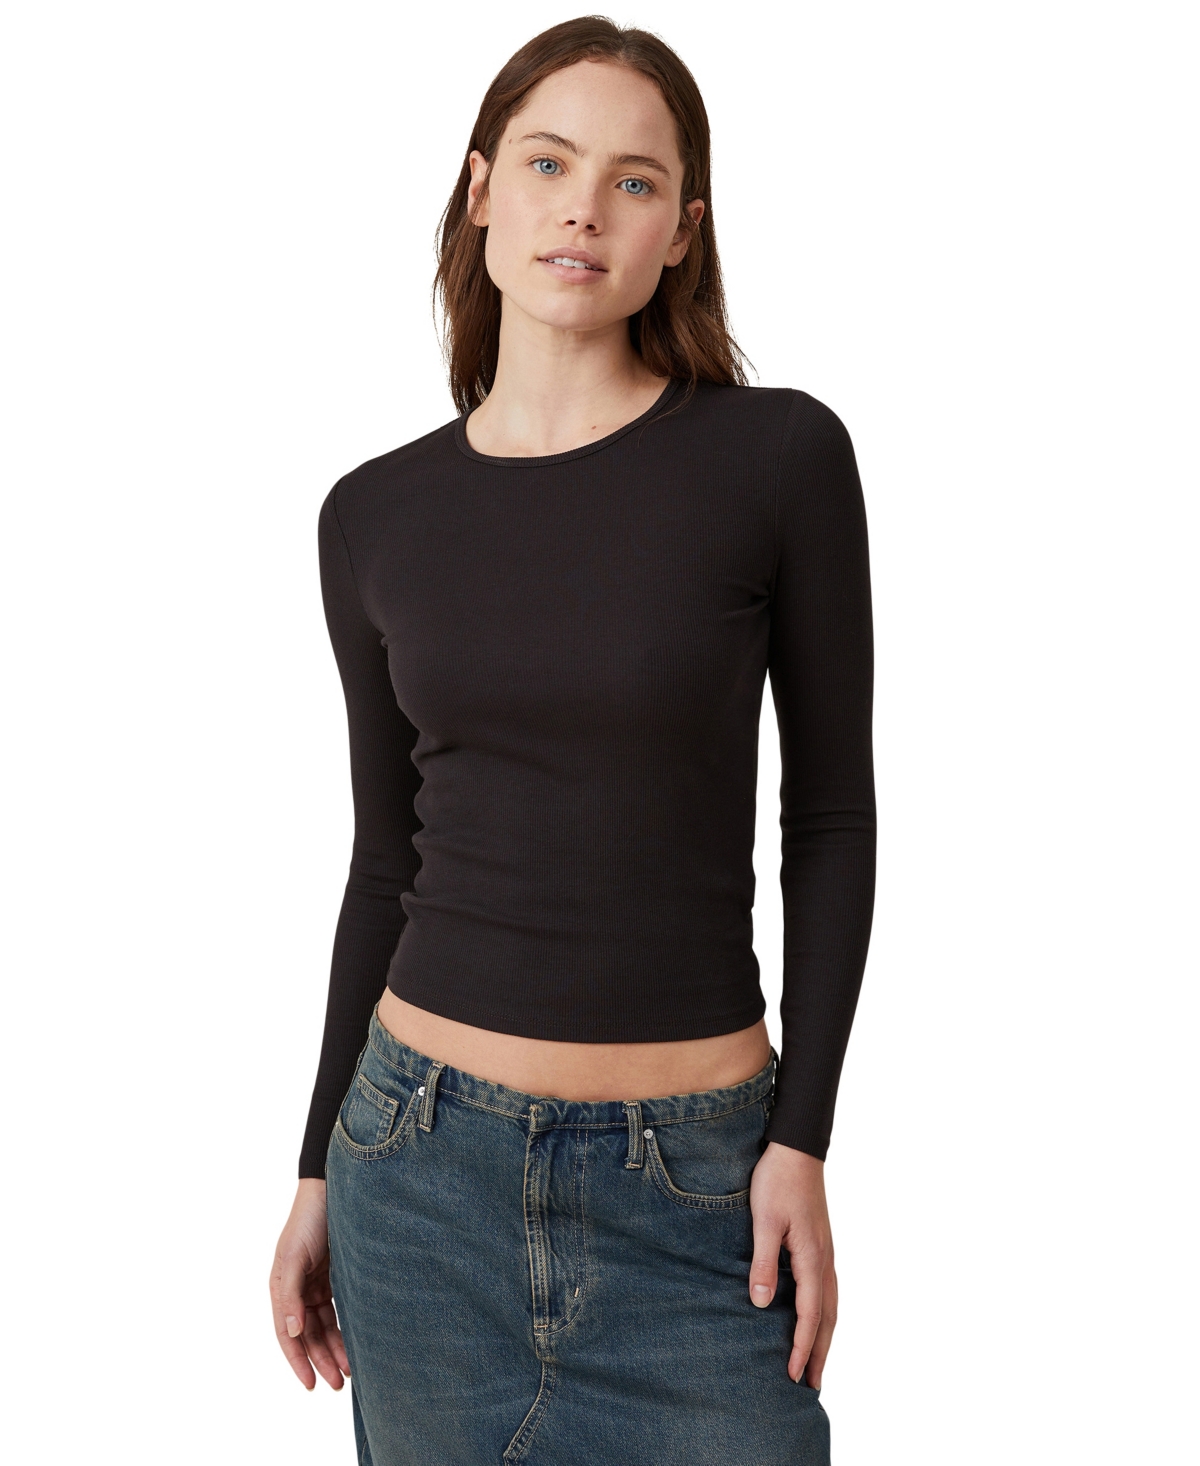 Women's The One Ribbed Crew-Neck Top - Light Gray Marle